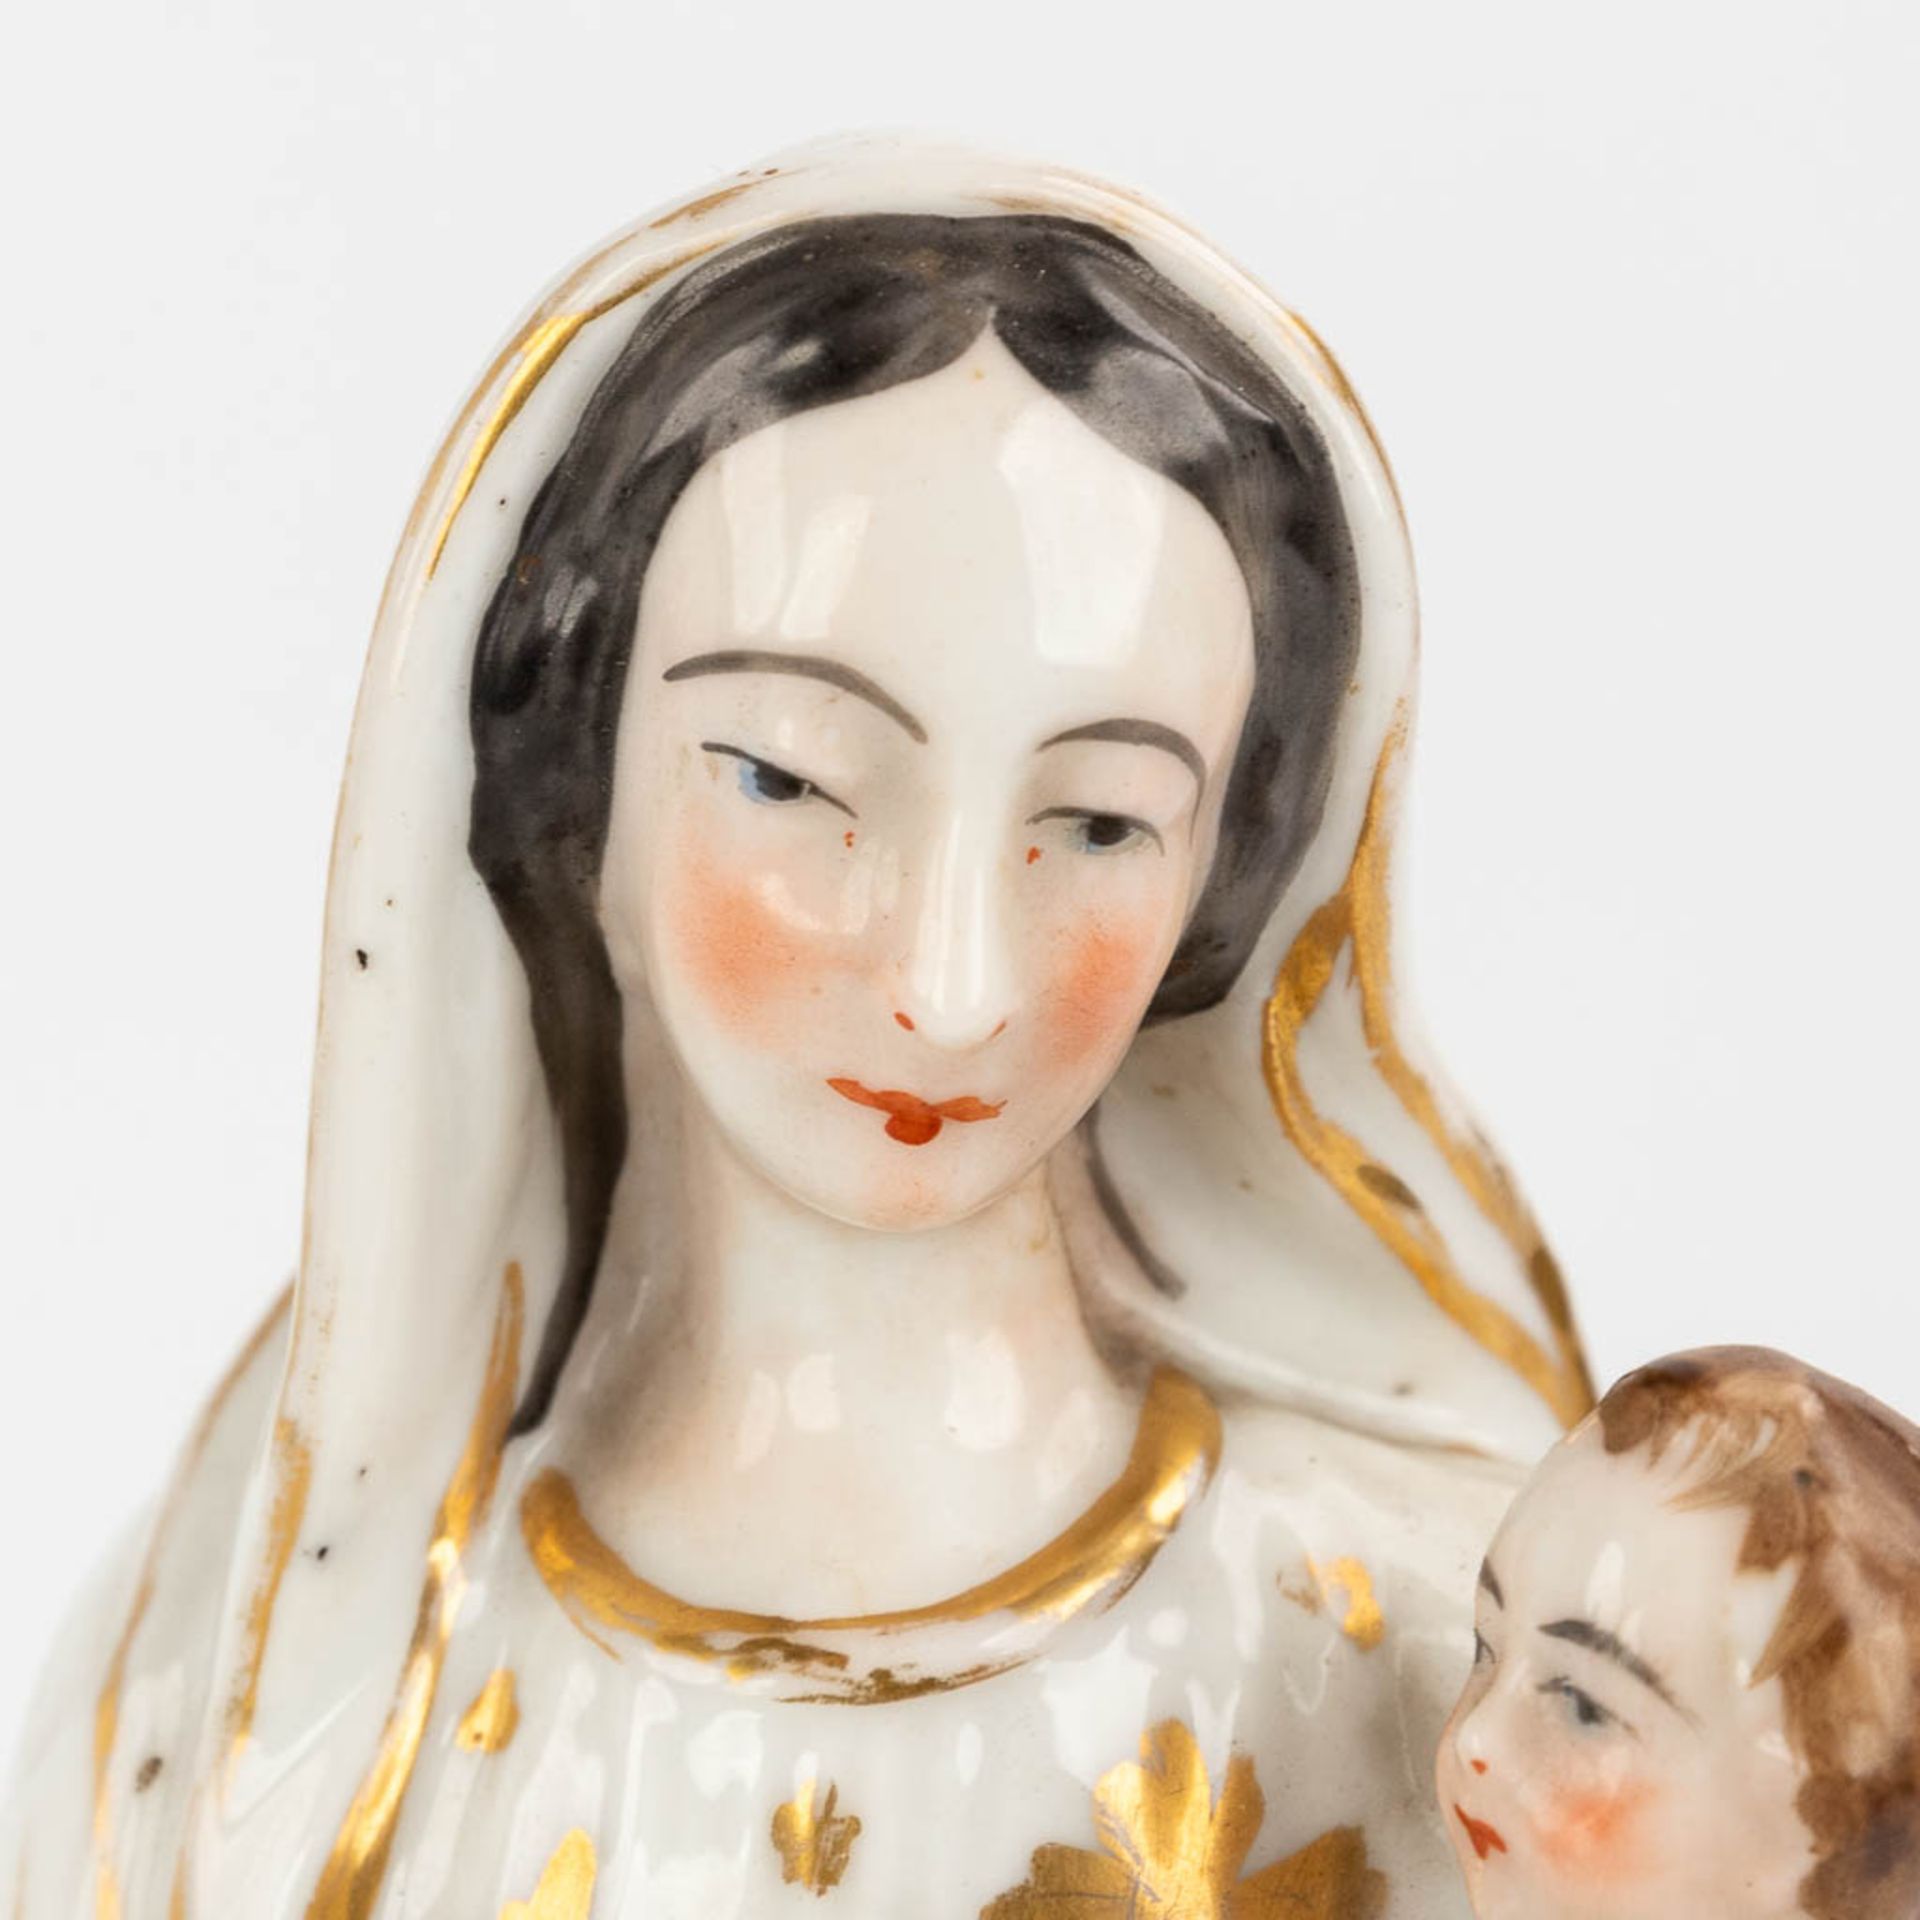 A porcelain figurine of Mary and Joseph, made in Andenne, Belgium. (H: 32 cm) - Image 12 of 13